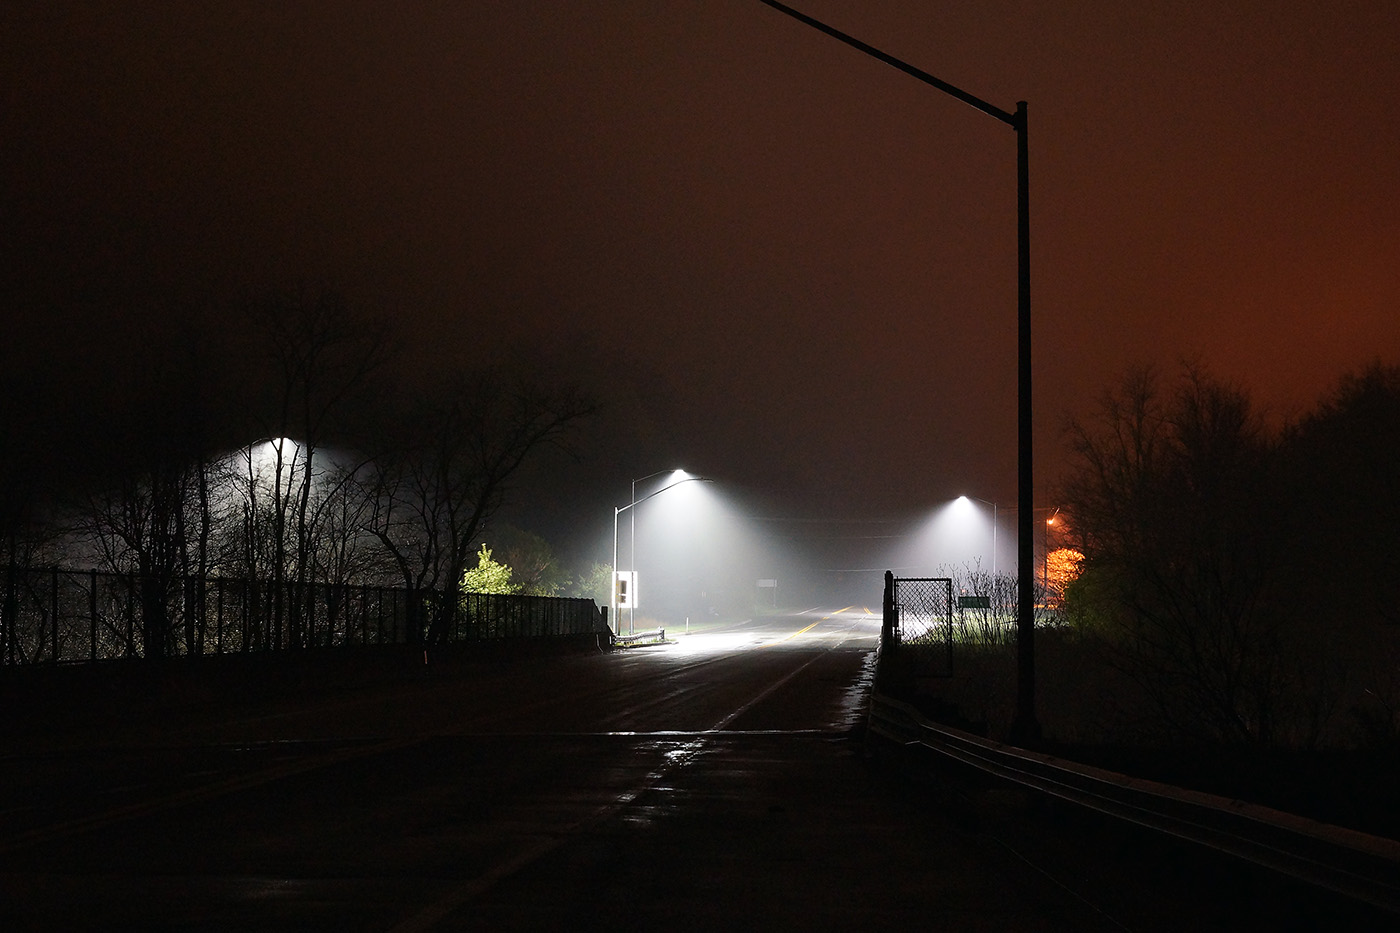 Night photograph of enhanced lighting on a rural intersection.